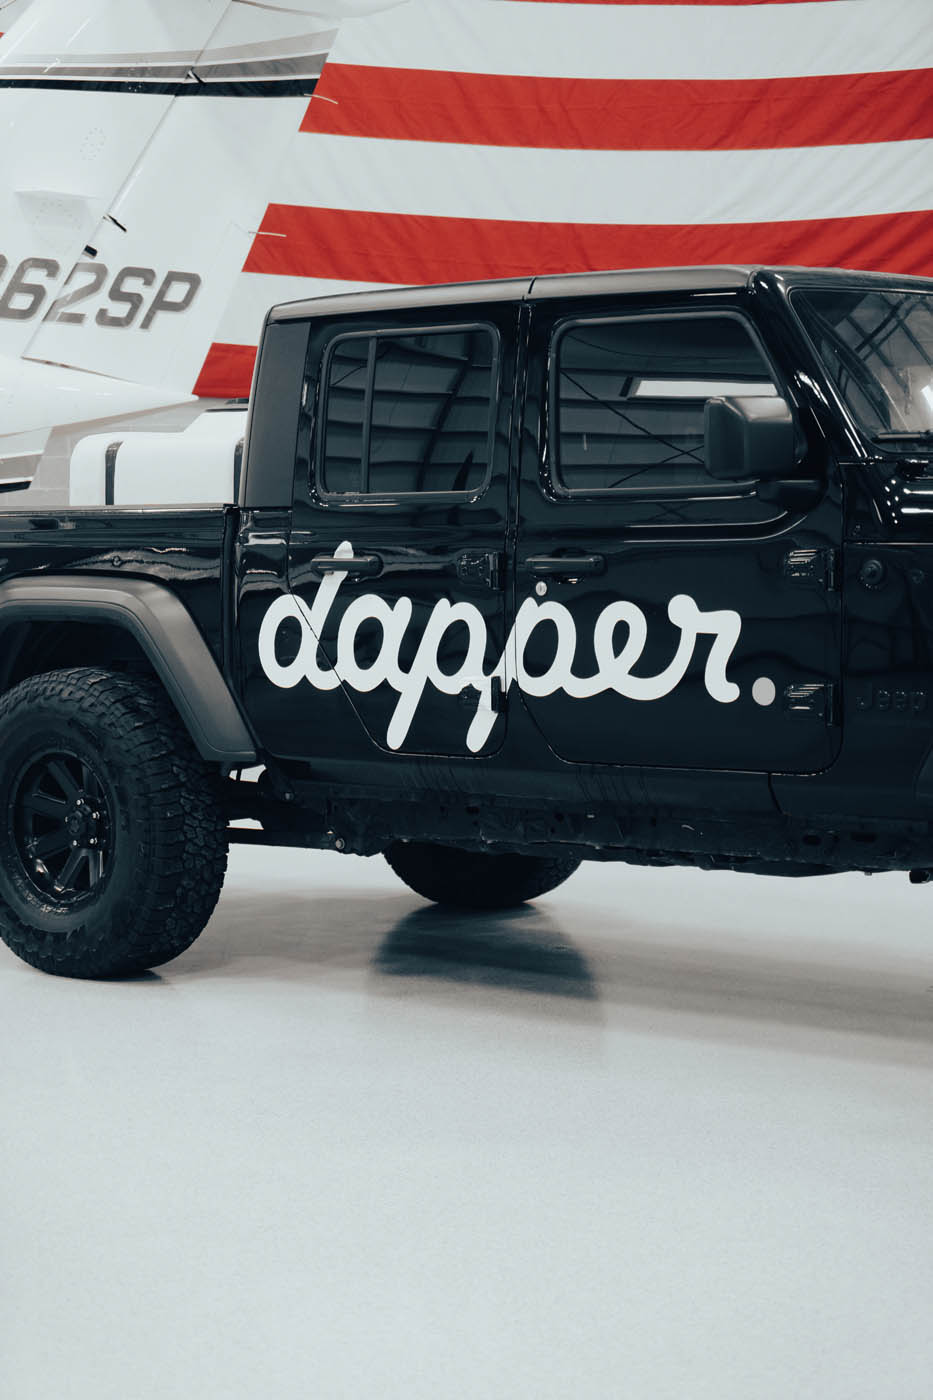 Dapper Pros jeep truck, book online today for professional car detailing in Salt Lake City. 